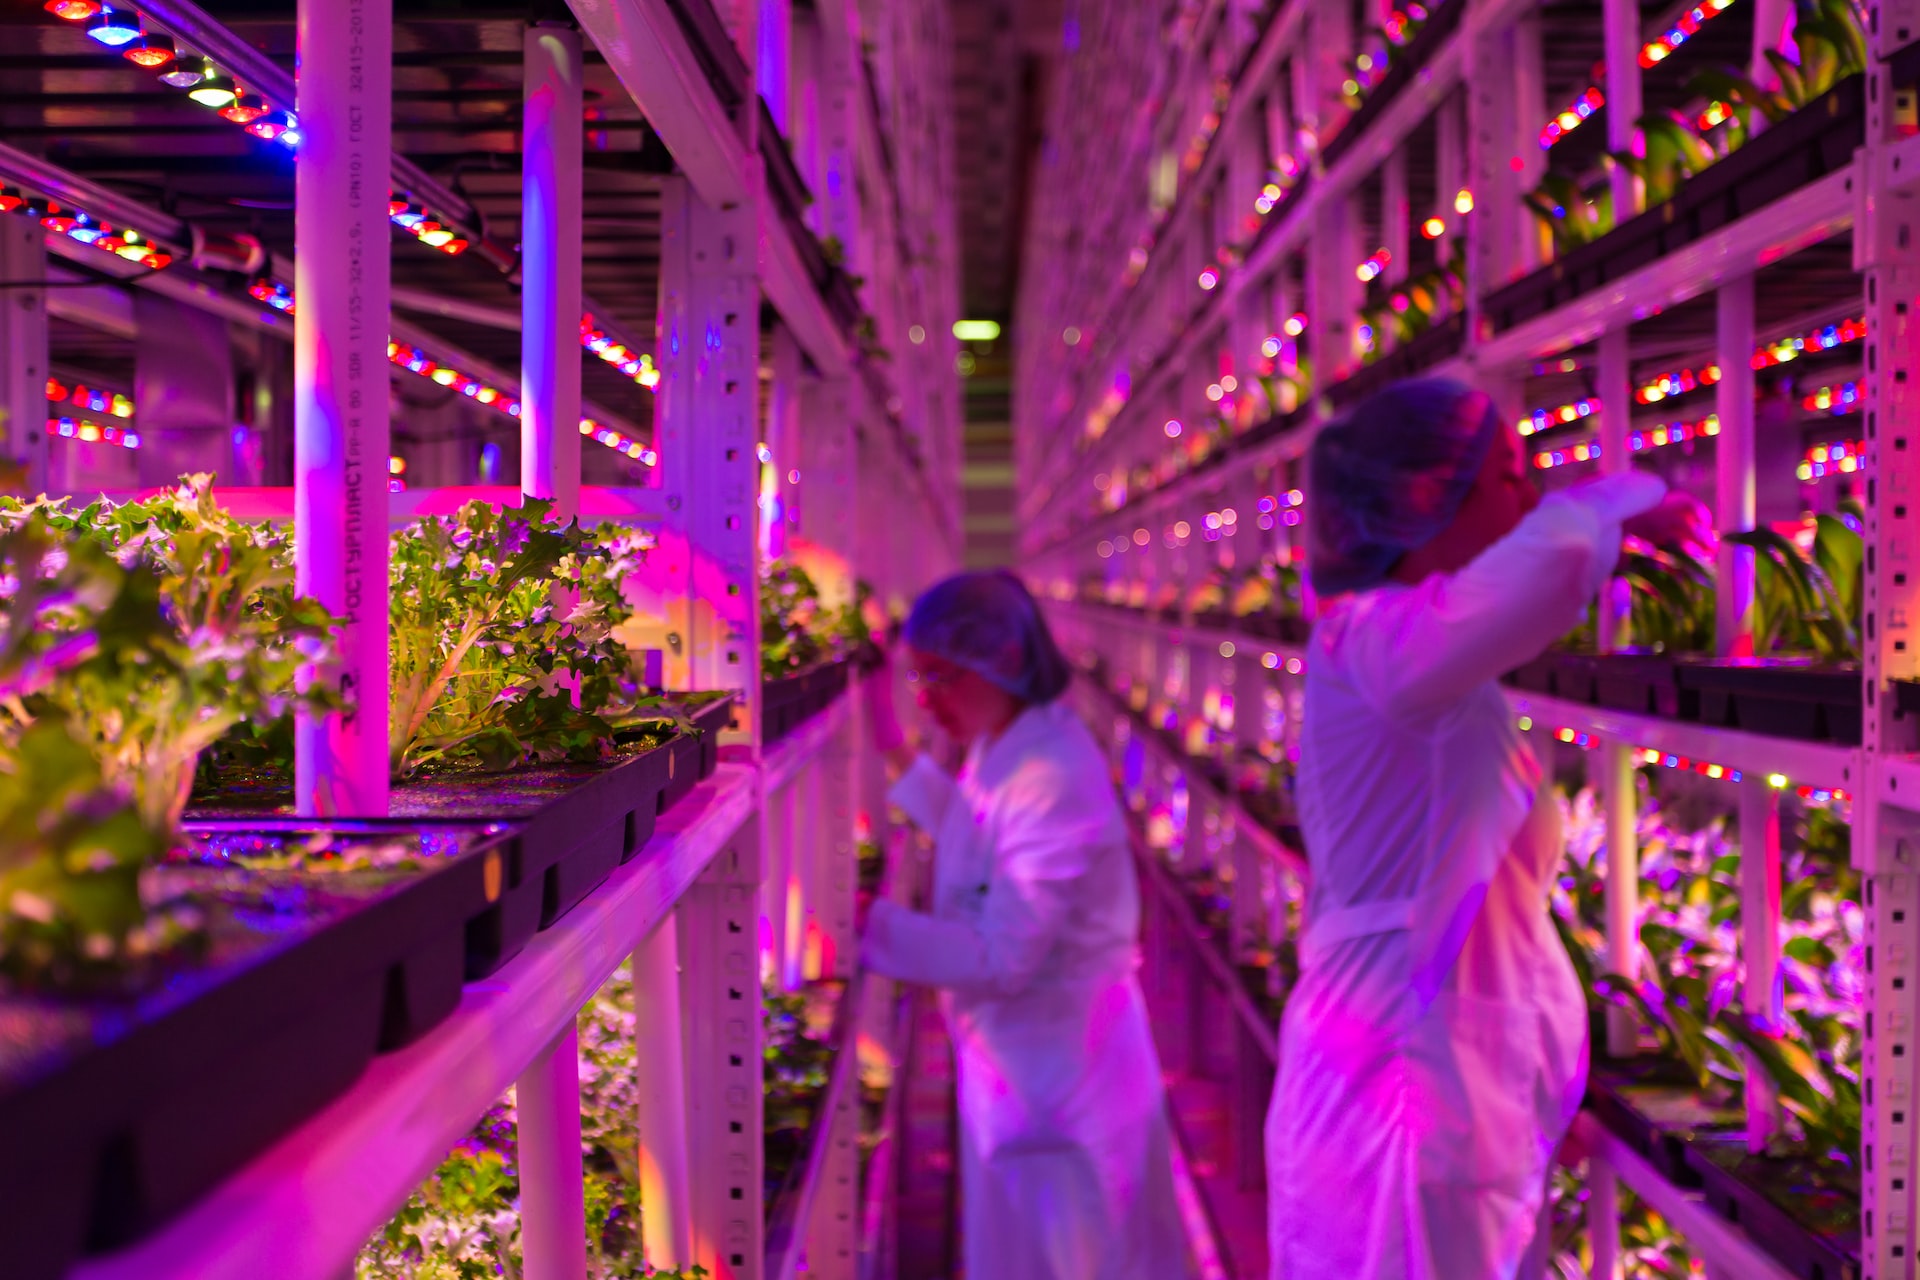 Vertical Farming Could Shore up Future Food Security as the World Faces Drought and Instability